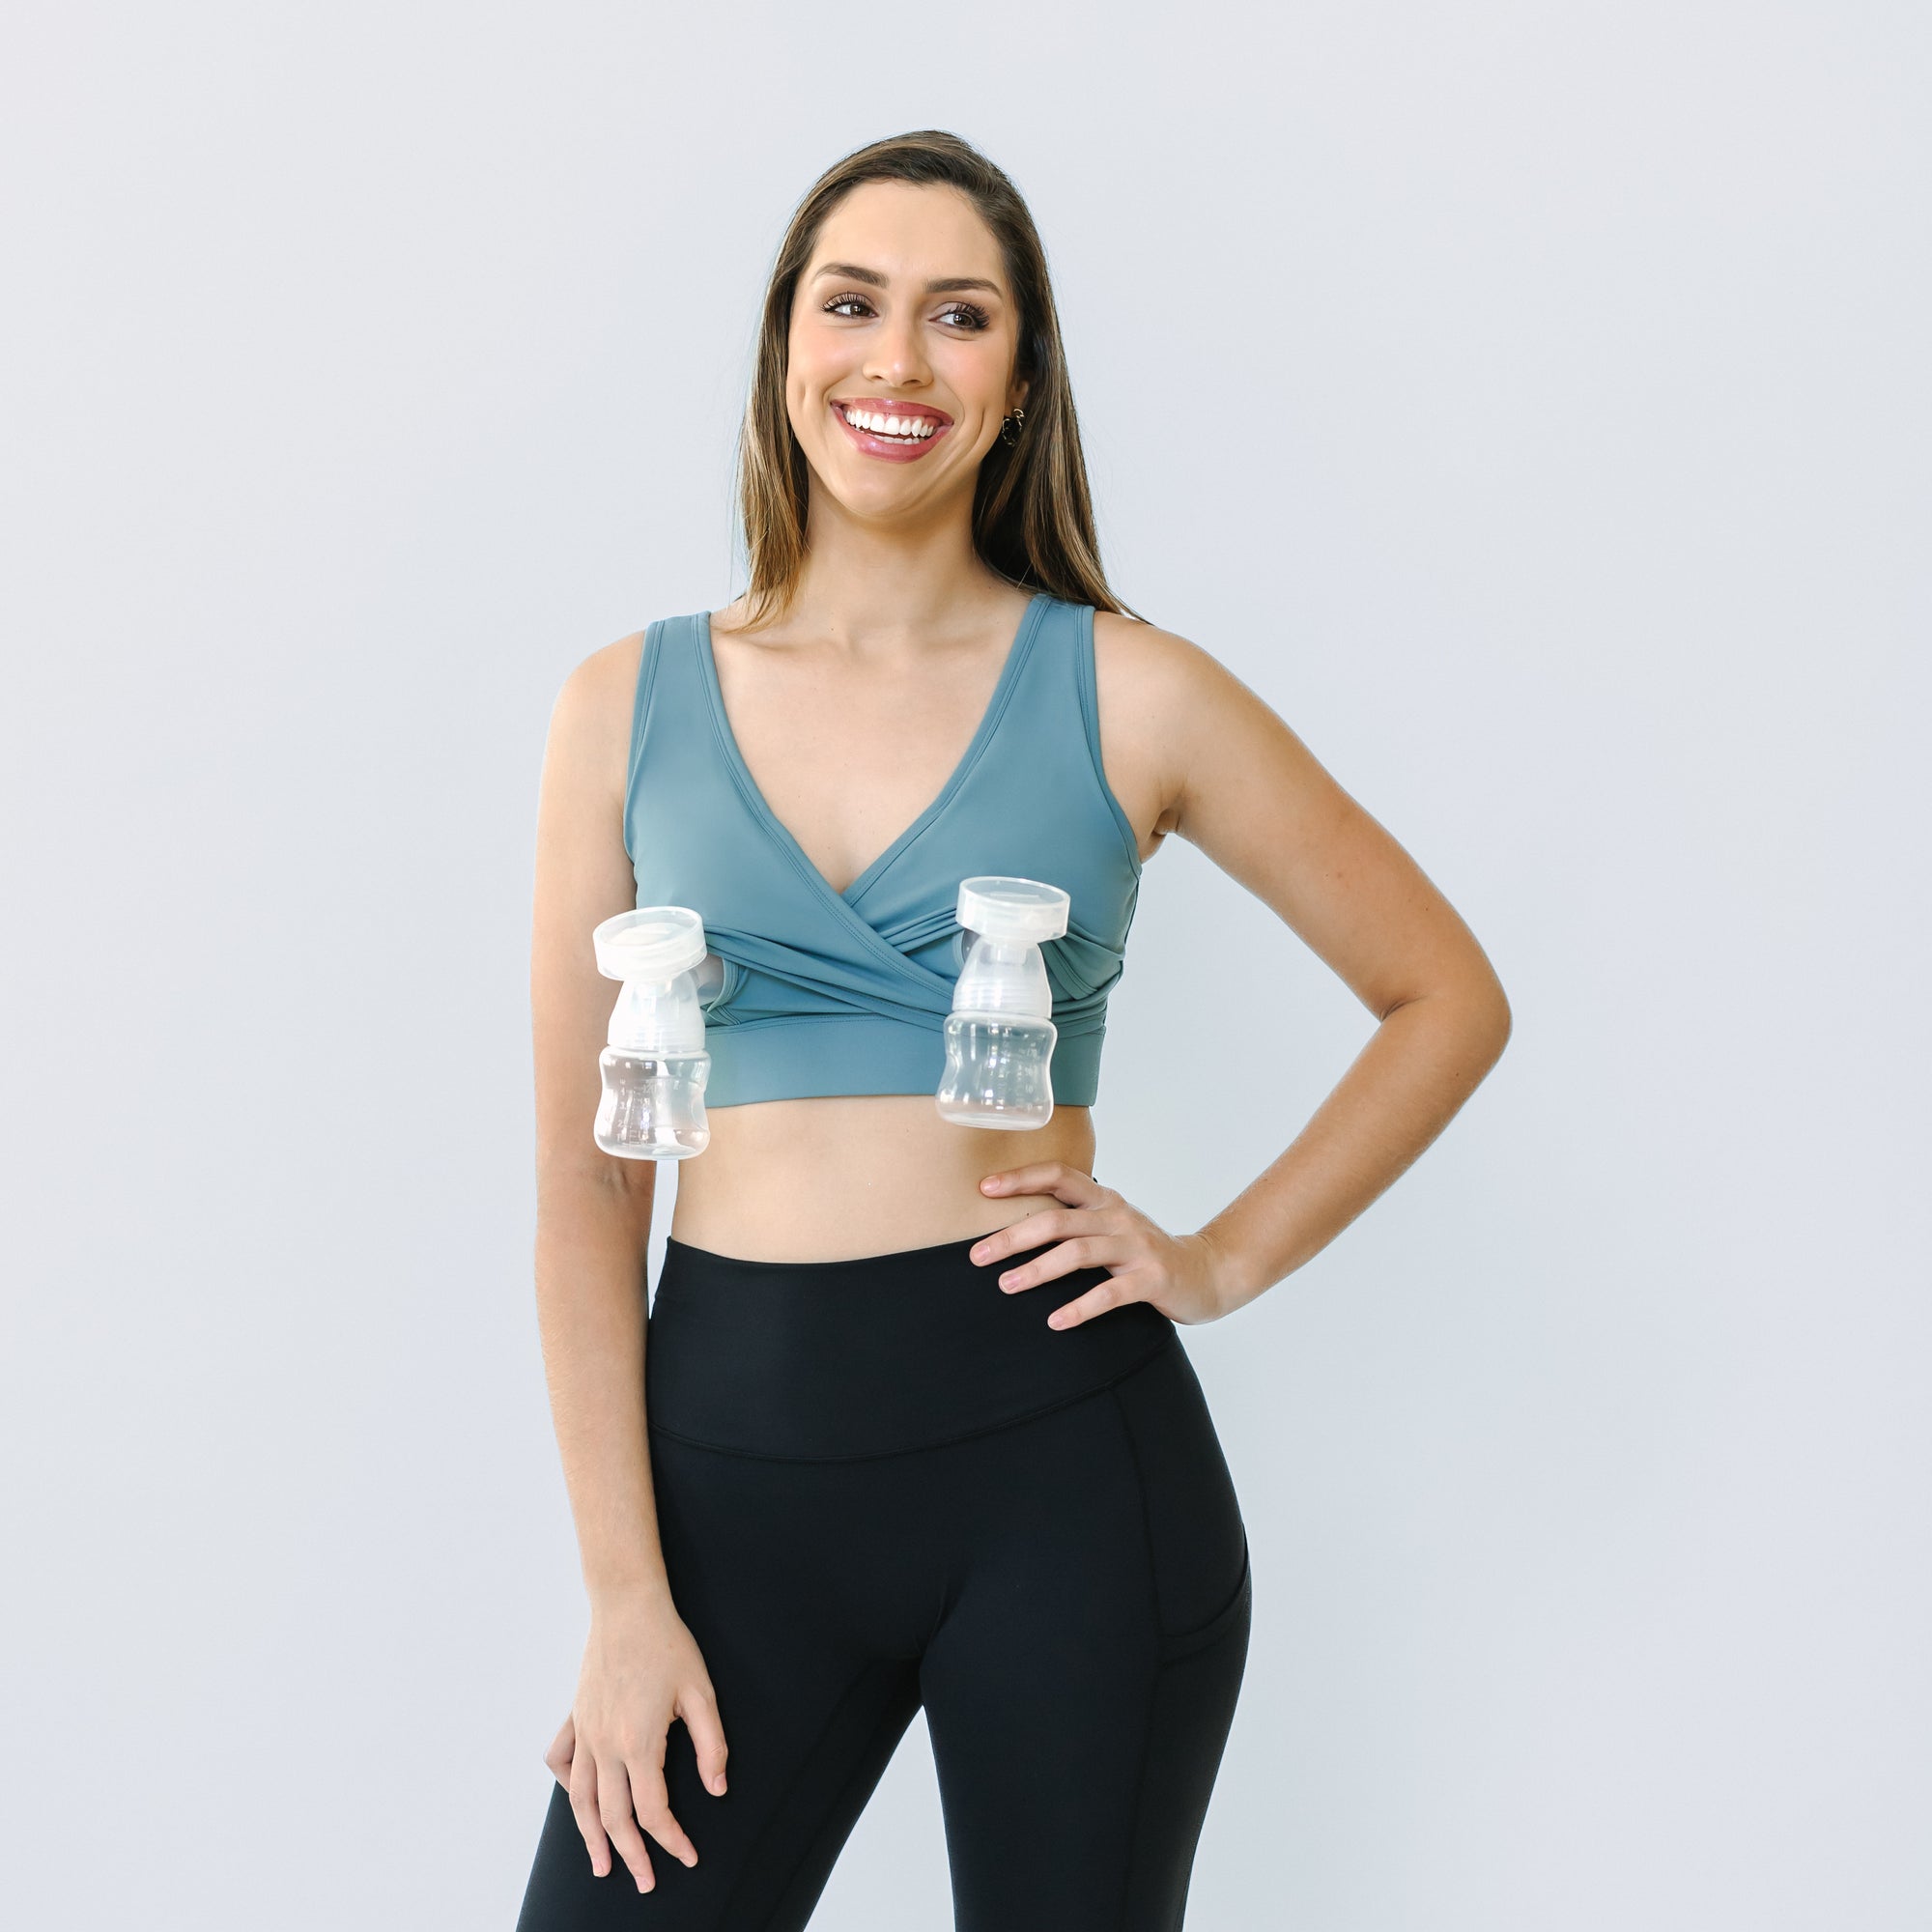 Everyday Luxe 2.0 Nursing & Hands-Free Pumping Bra - Teal Turquoise